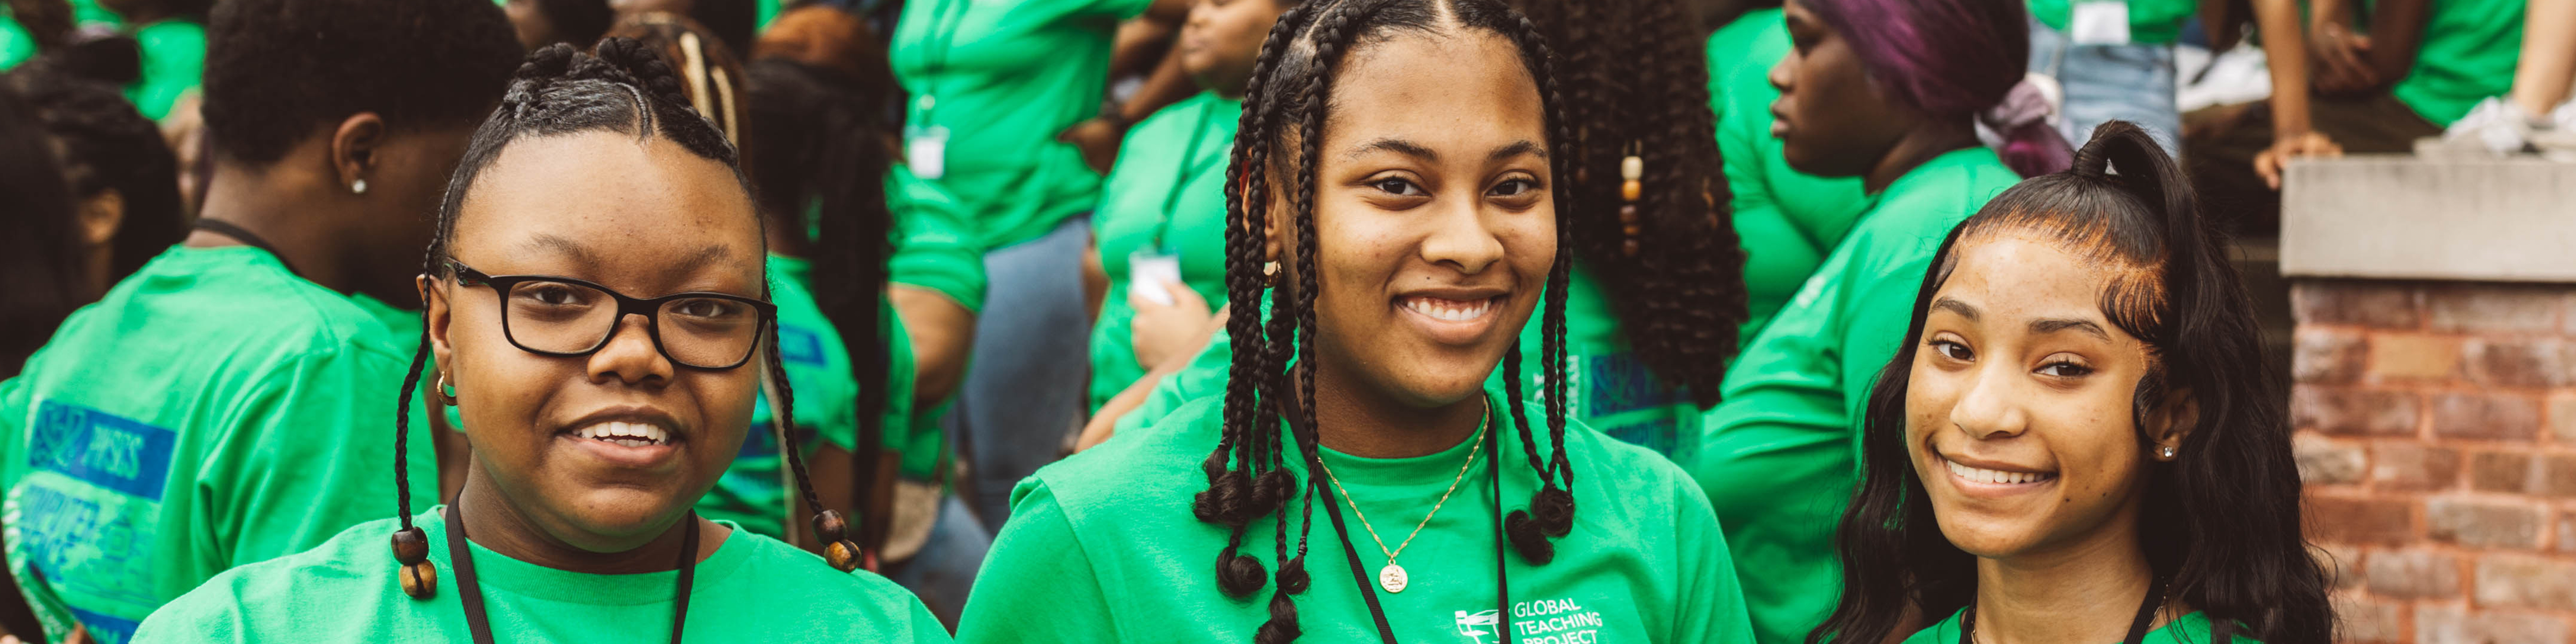 three young black women in green t-shirts smiling in a group photo